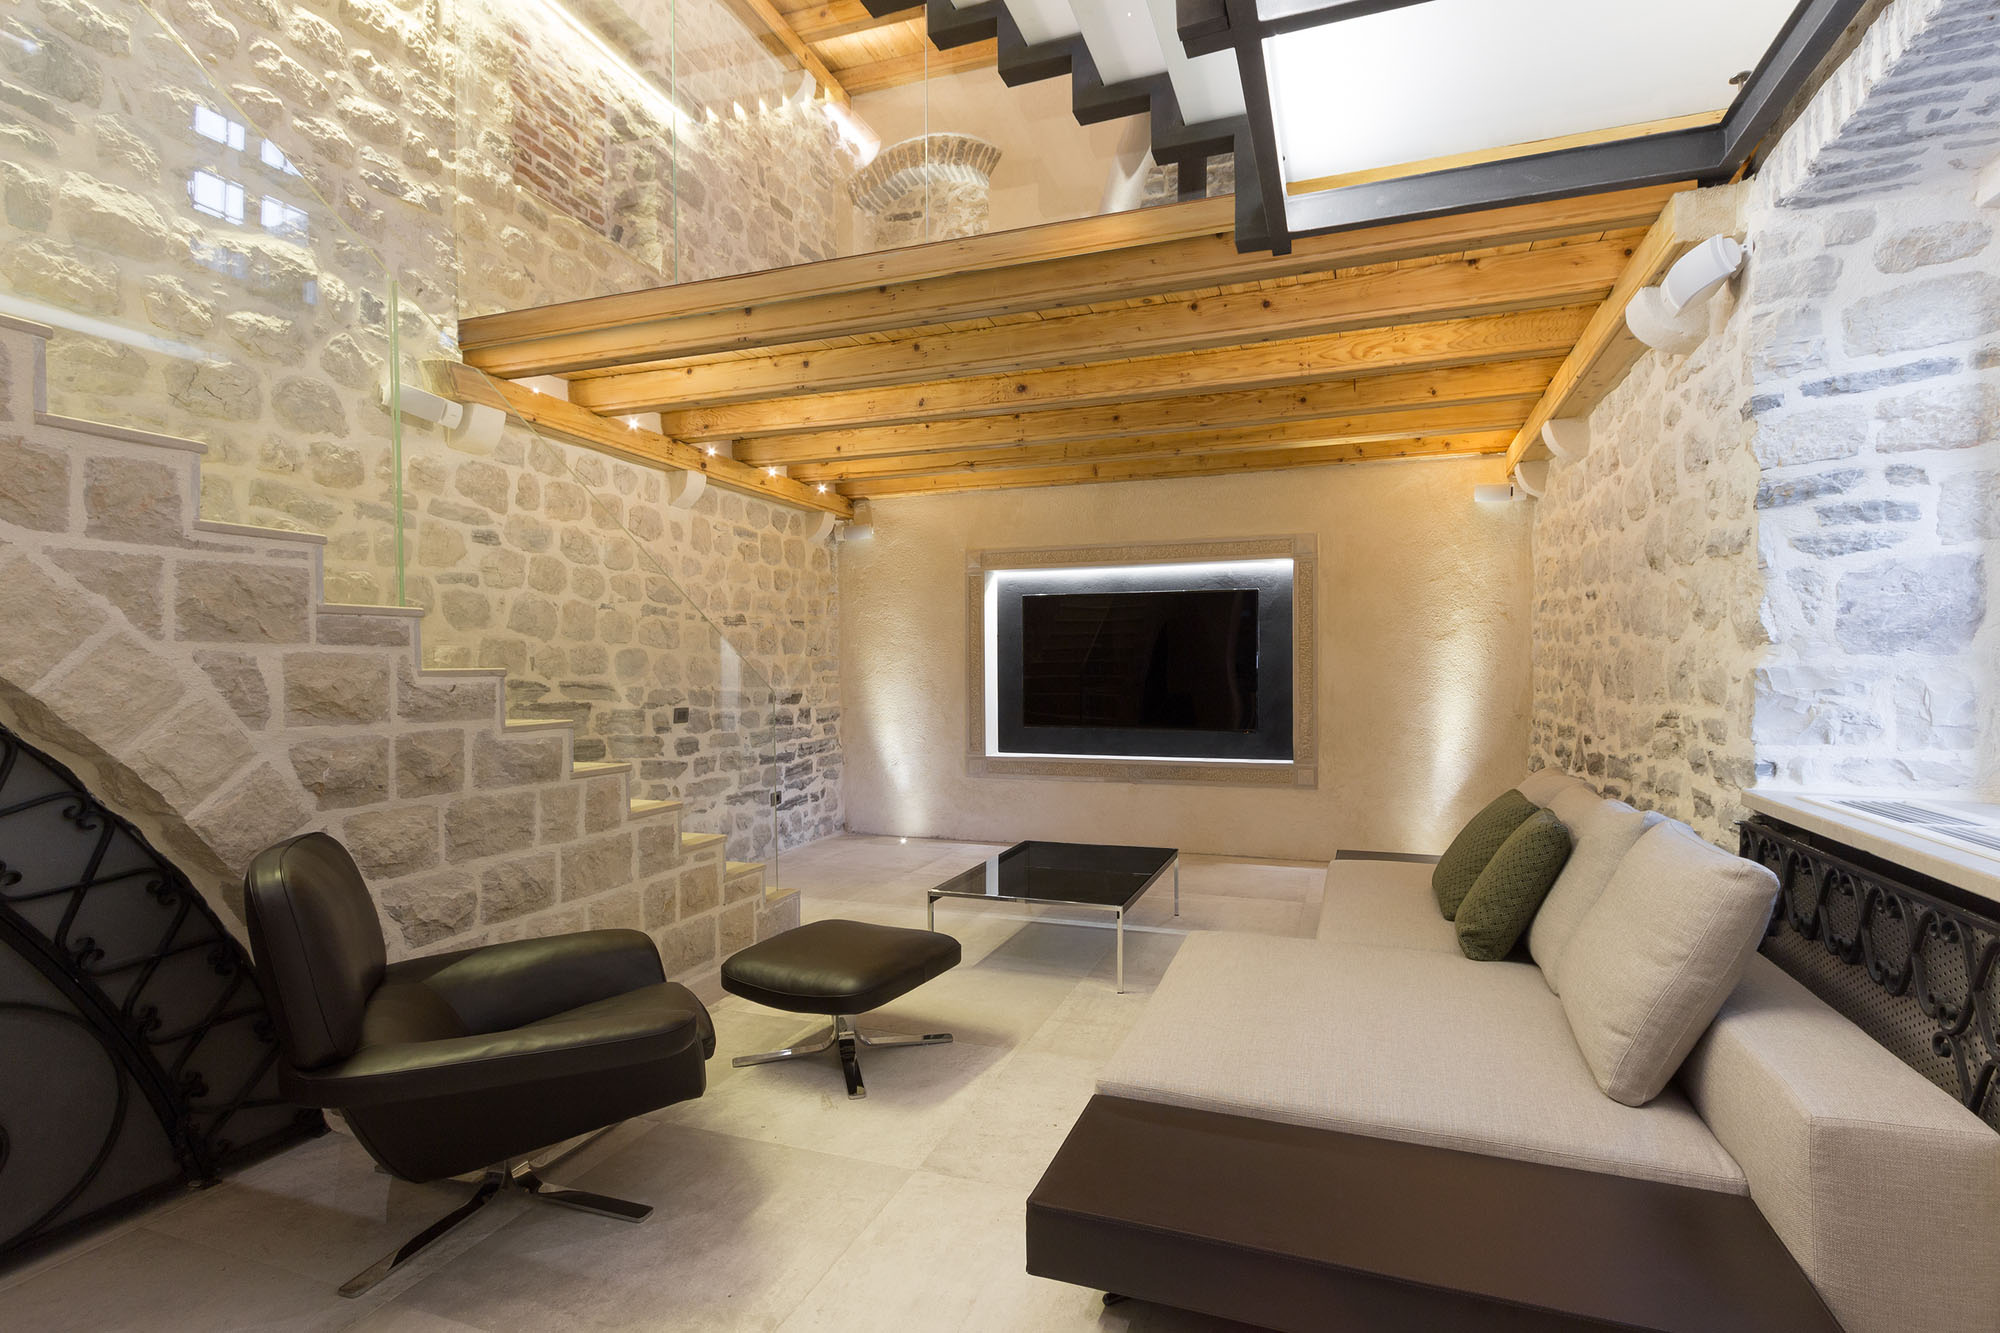 Entertainment Room with Stone Walls and Wood Beams